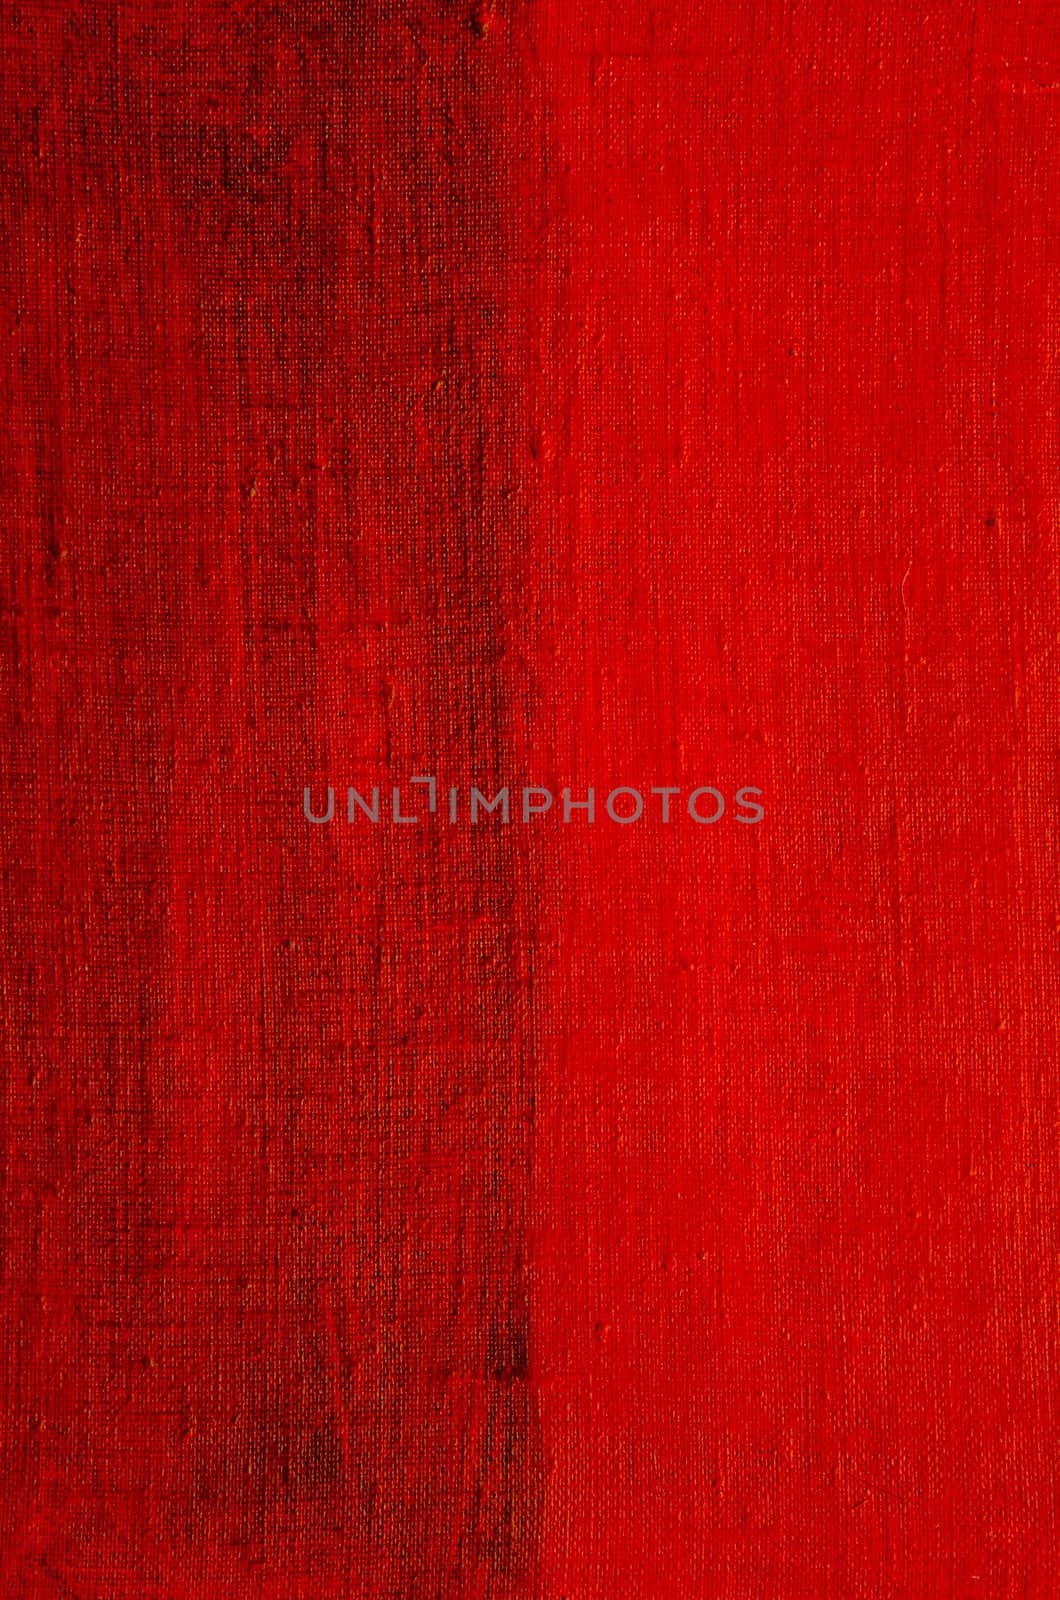 Material painted in red. Painted backgrounds. by sauletas